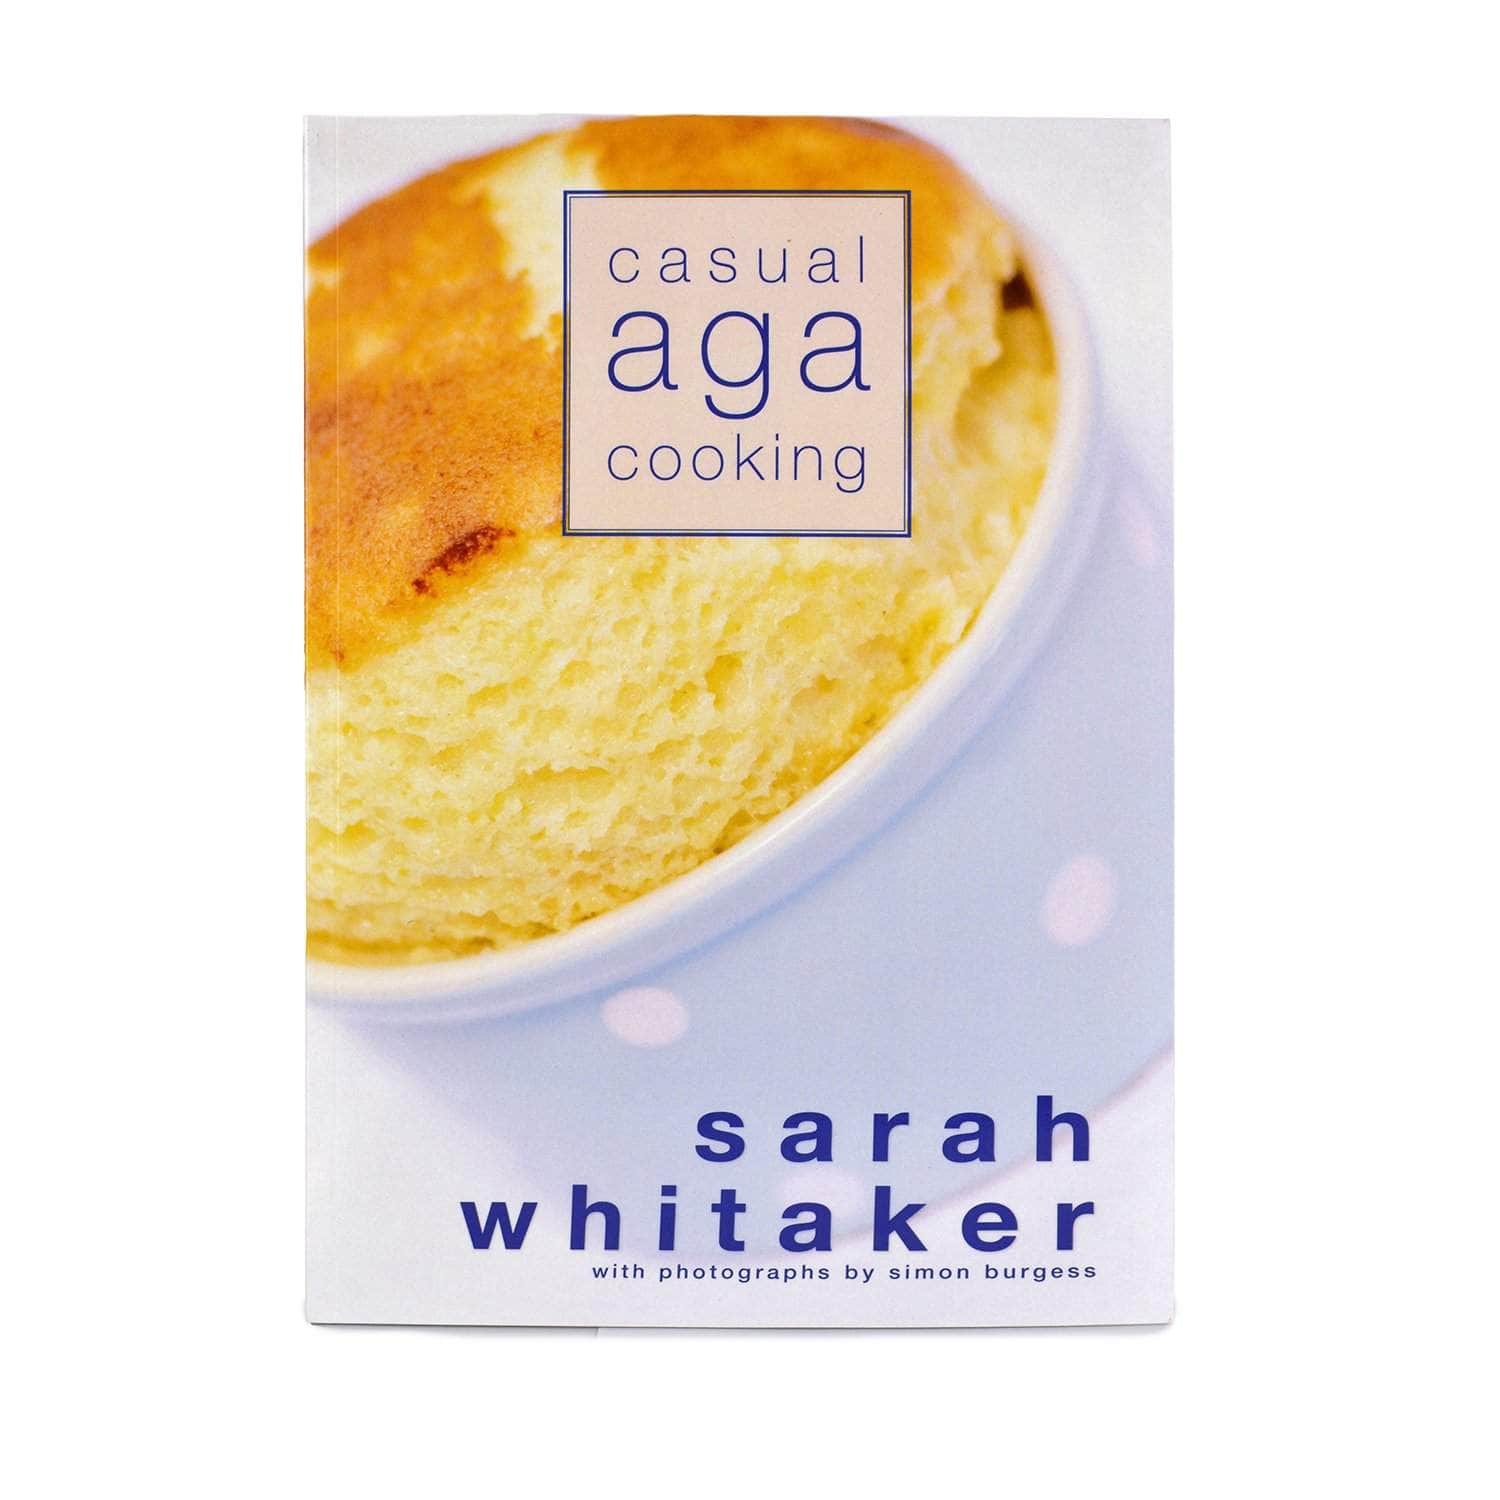 'Casual Aga cooking' - cookbook by Sarah Whitaker